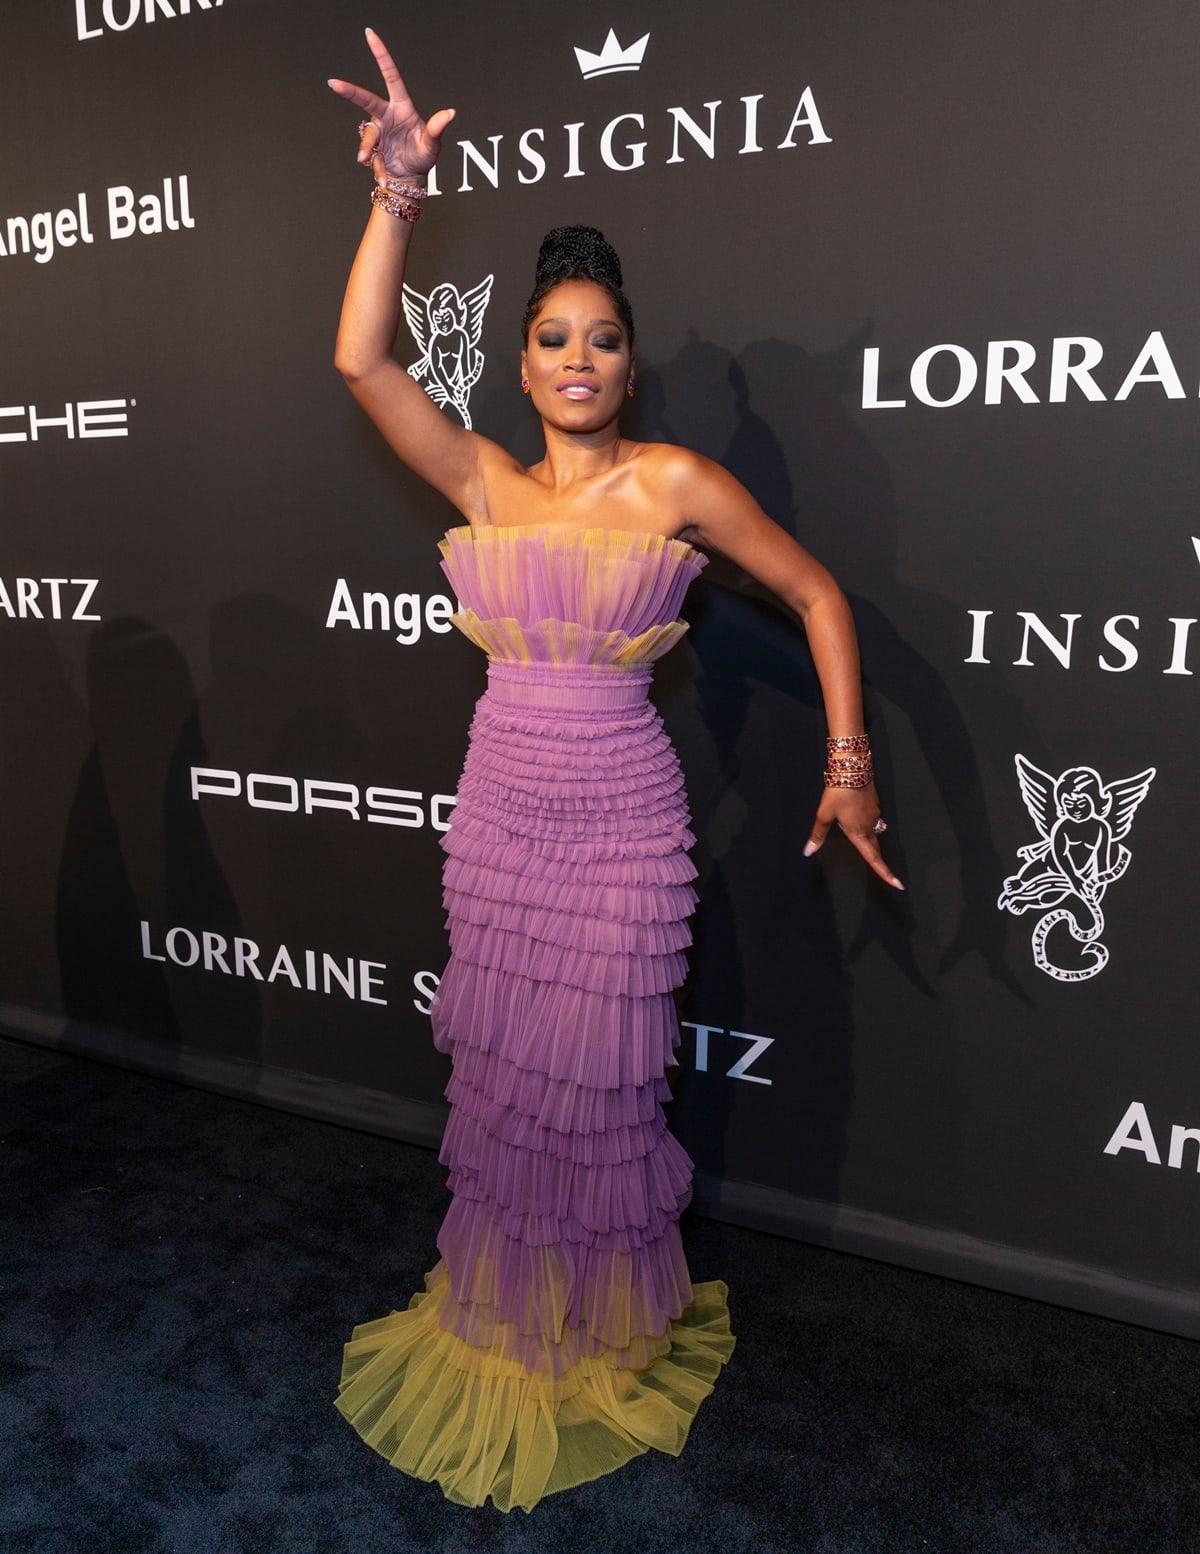 Keke Palmer wears a purple and yellow J. Mendel Spring 2020 gown and Lorraine Schwartz jewelry while attending the Gabrielle’s Angel Foundation 2019 Angel Ball